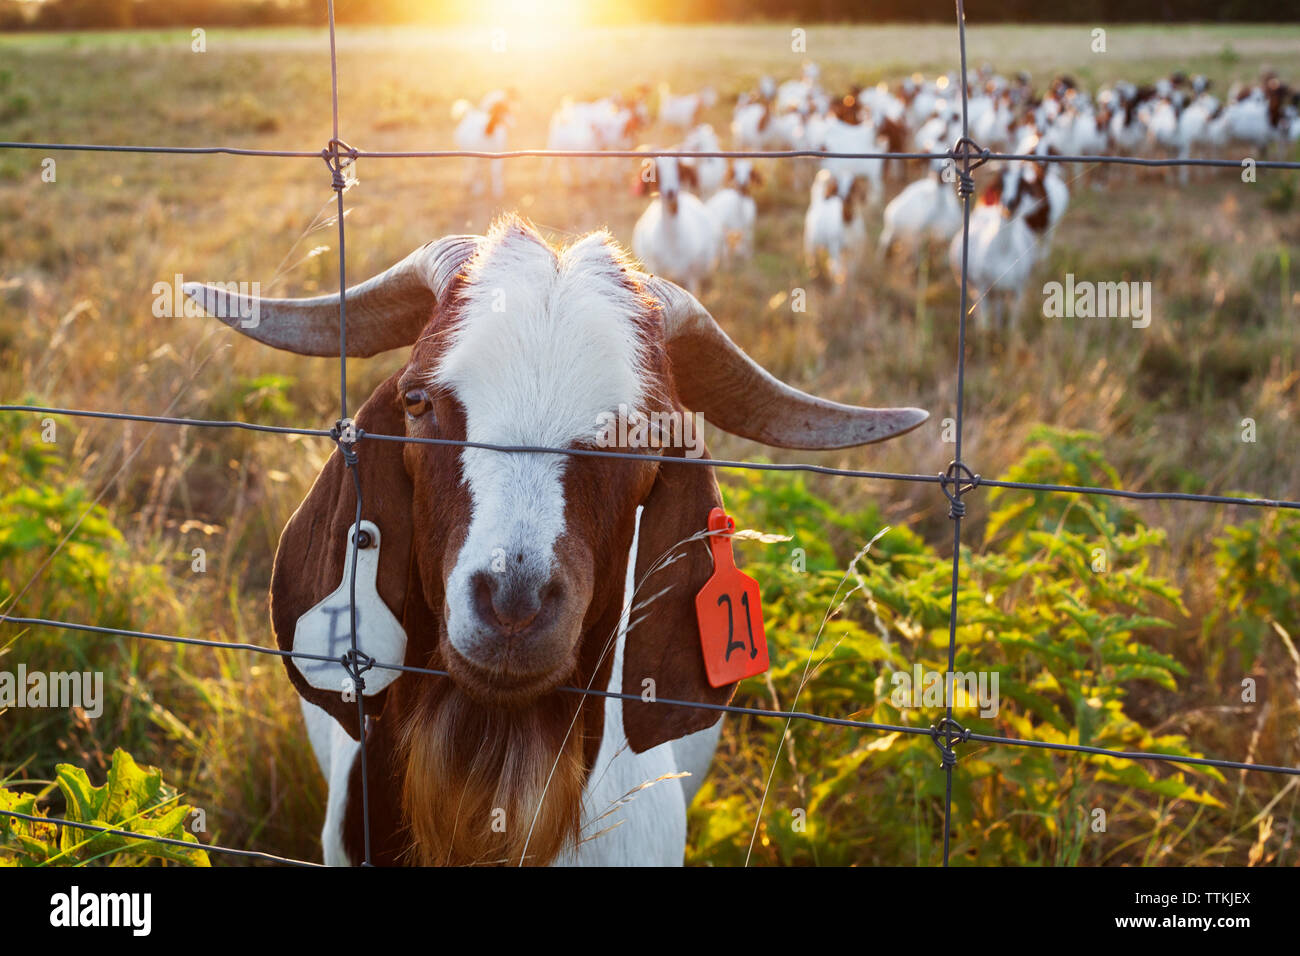 Portrait of goat behind fence on field Stock Photo